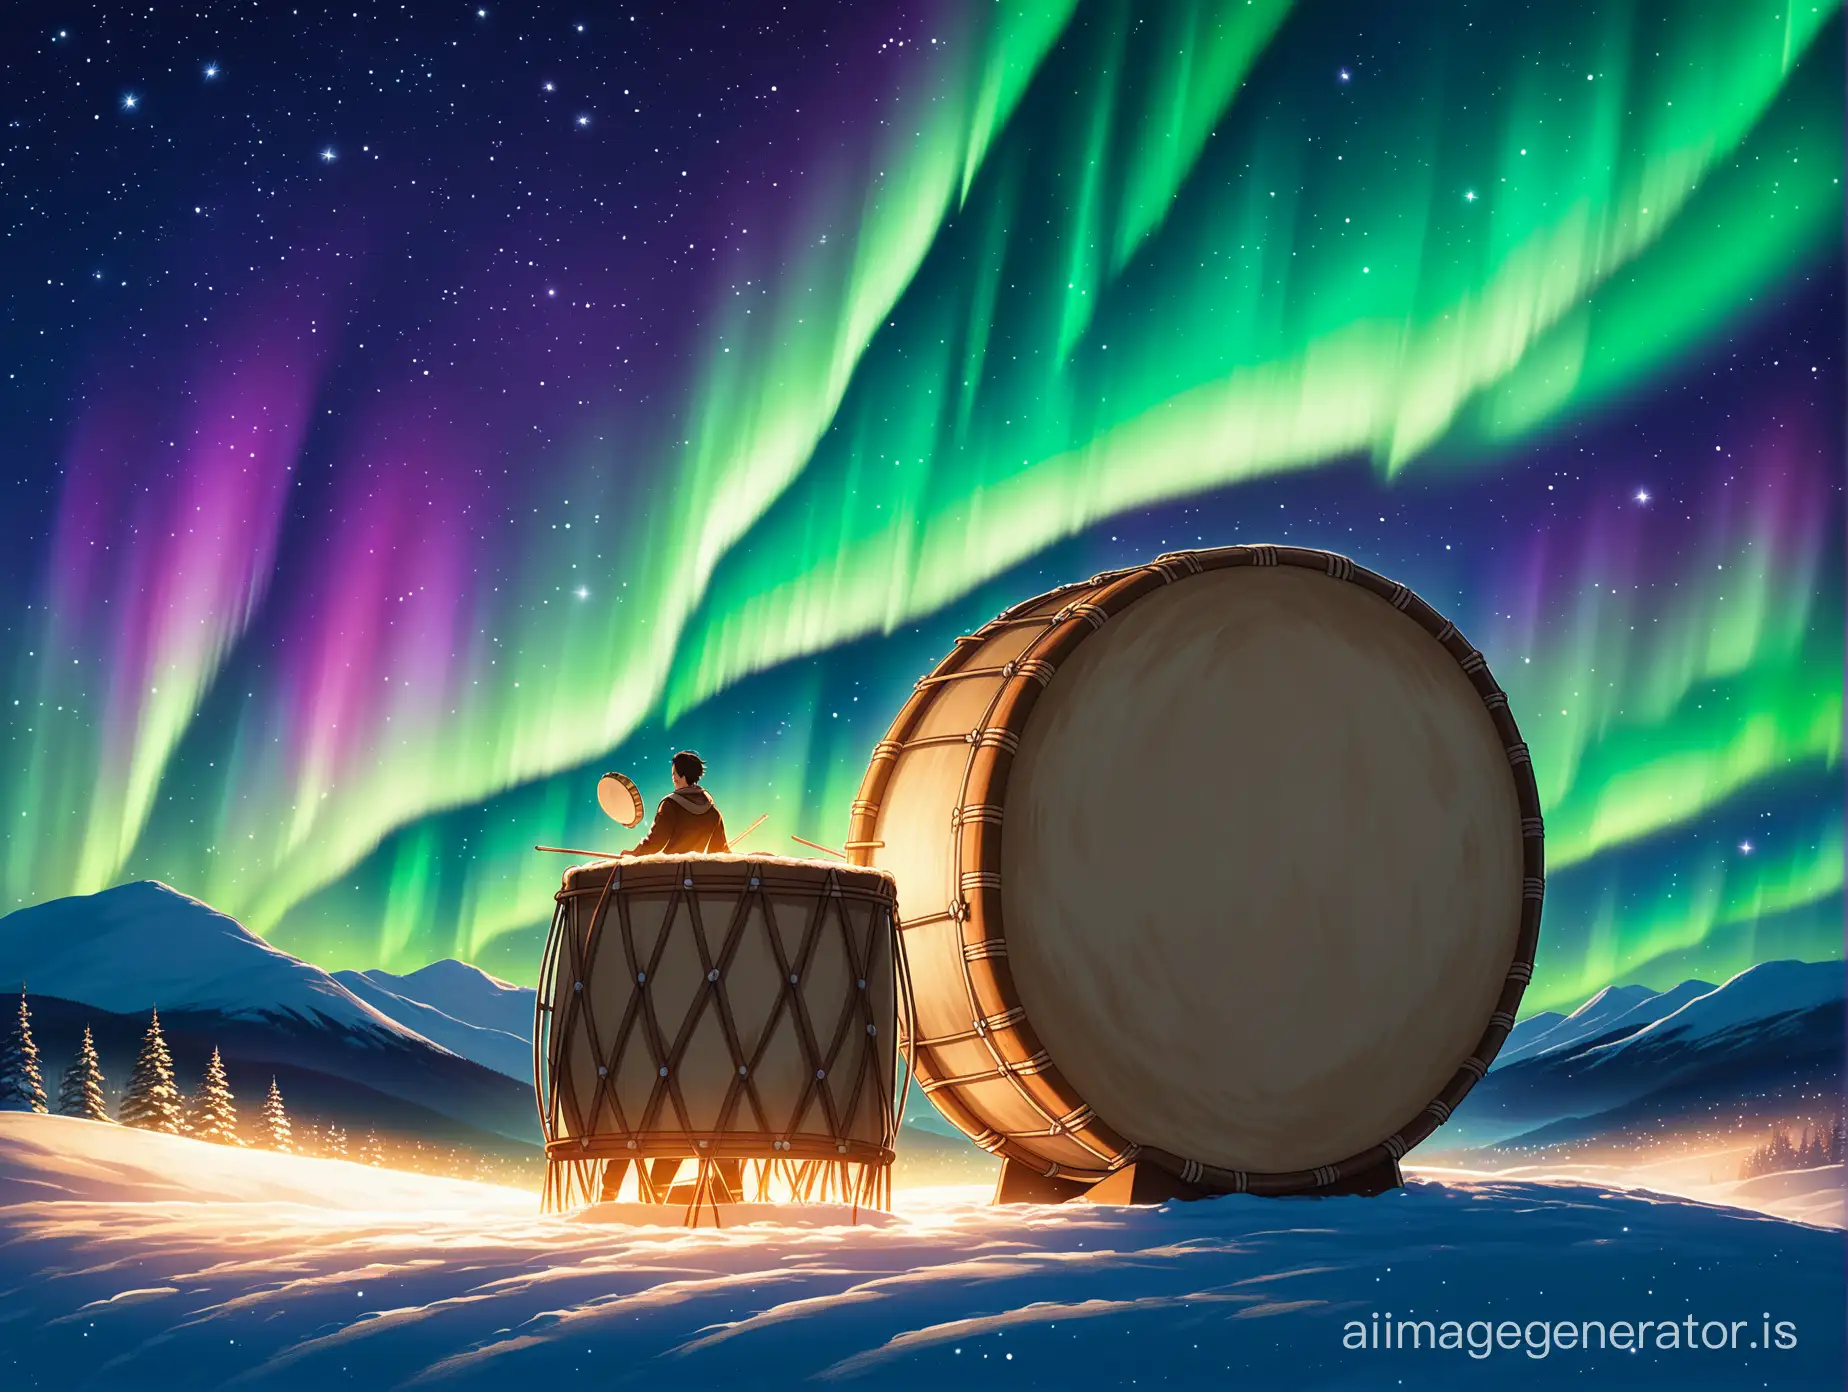 A handsome young man beats an enormous cowhide drum on a hill at night with twinkling stars and aurora lights in the sky.